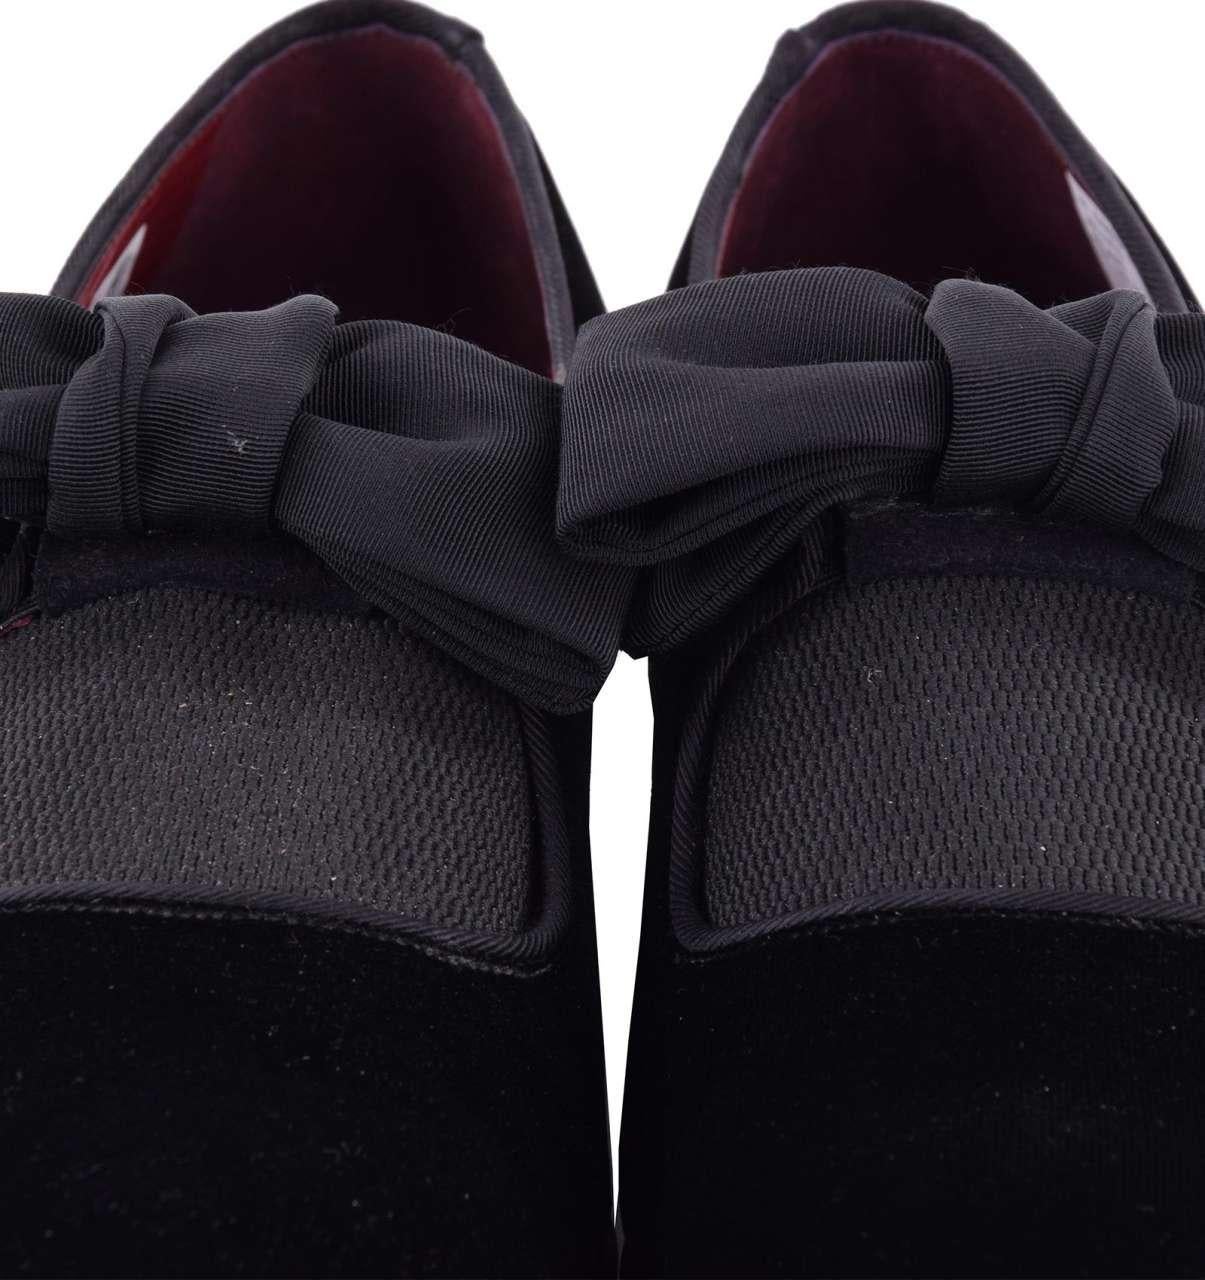 Dolce & Gabbana - Velour Slip-Ons MILANO with Bow Tie EUR 39.5 In Excellent Condition For Sale In Erkrath, DE